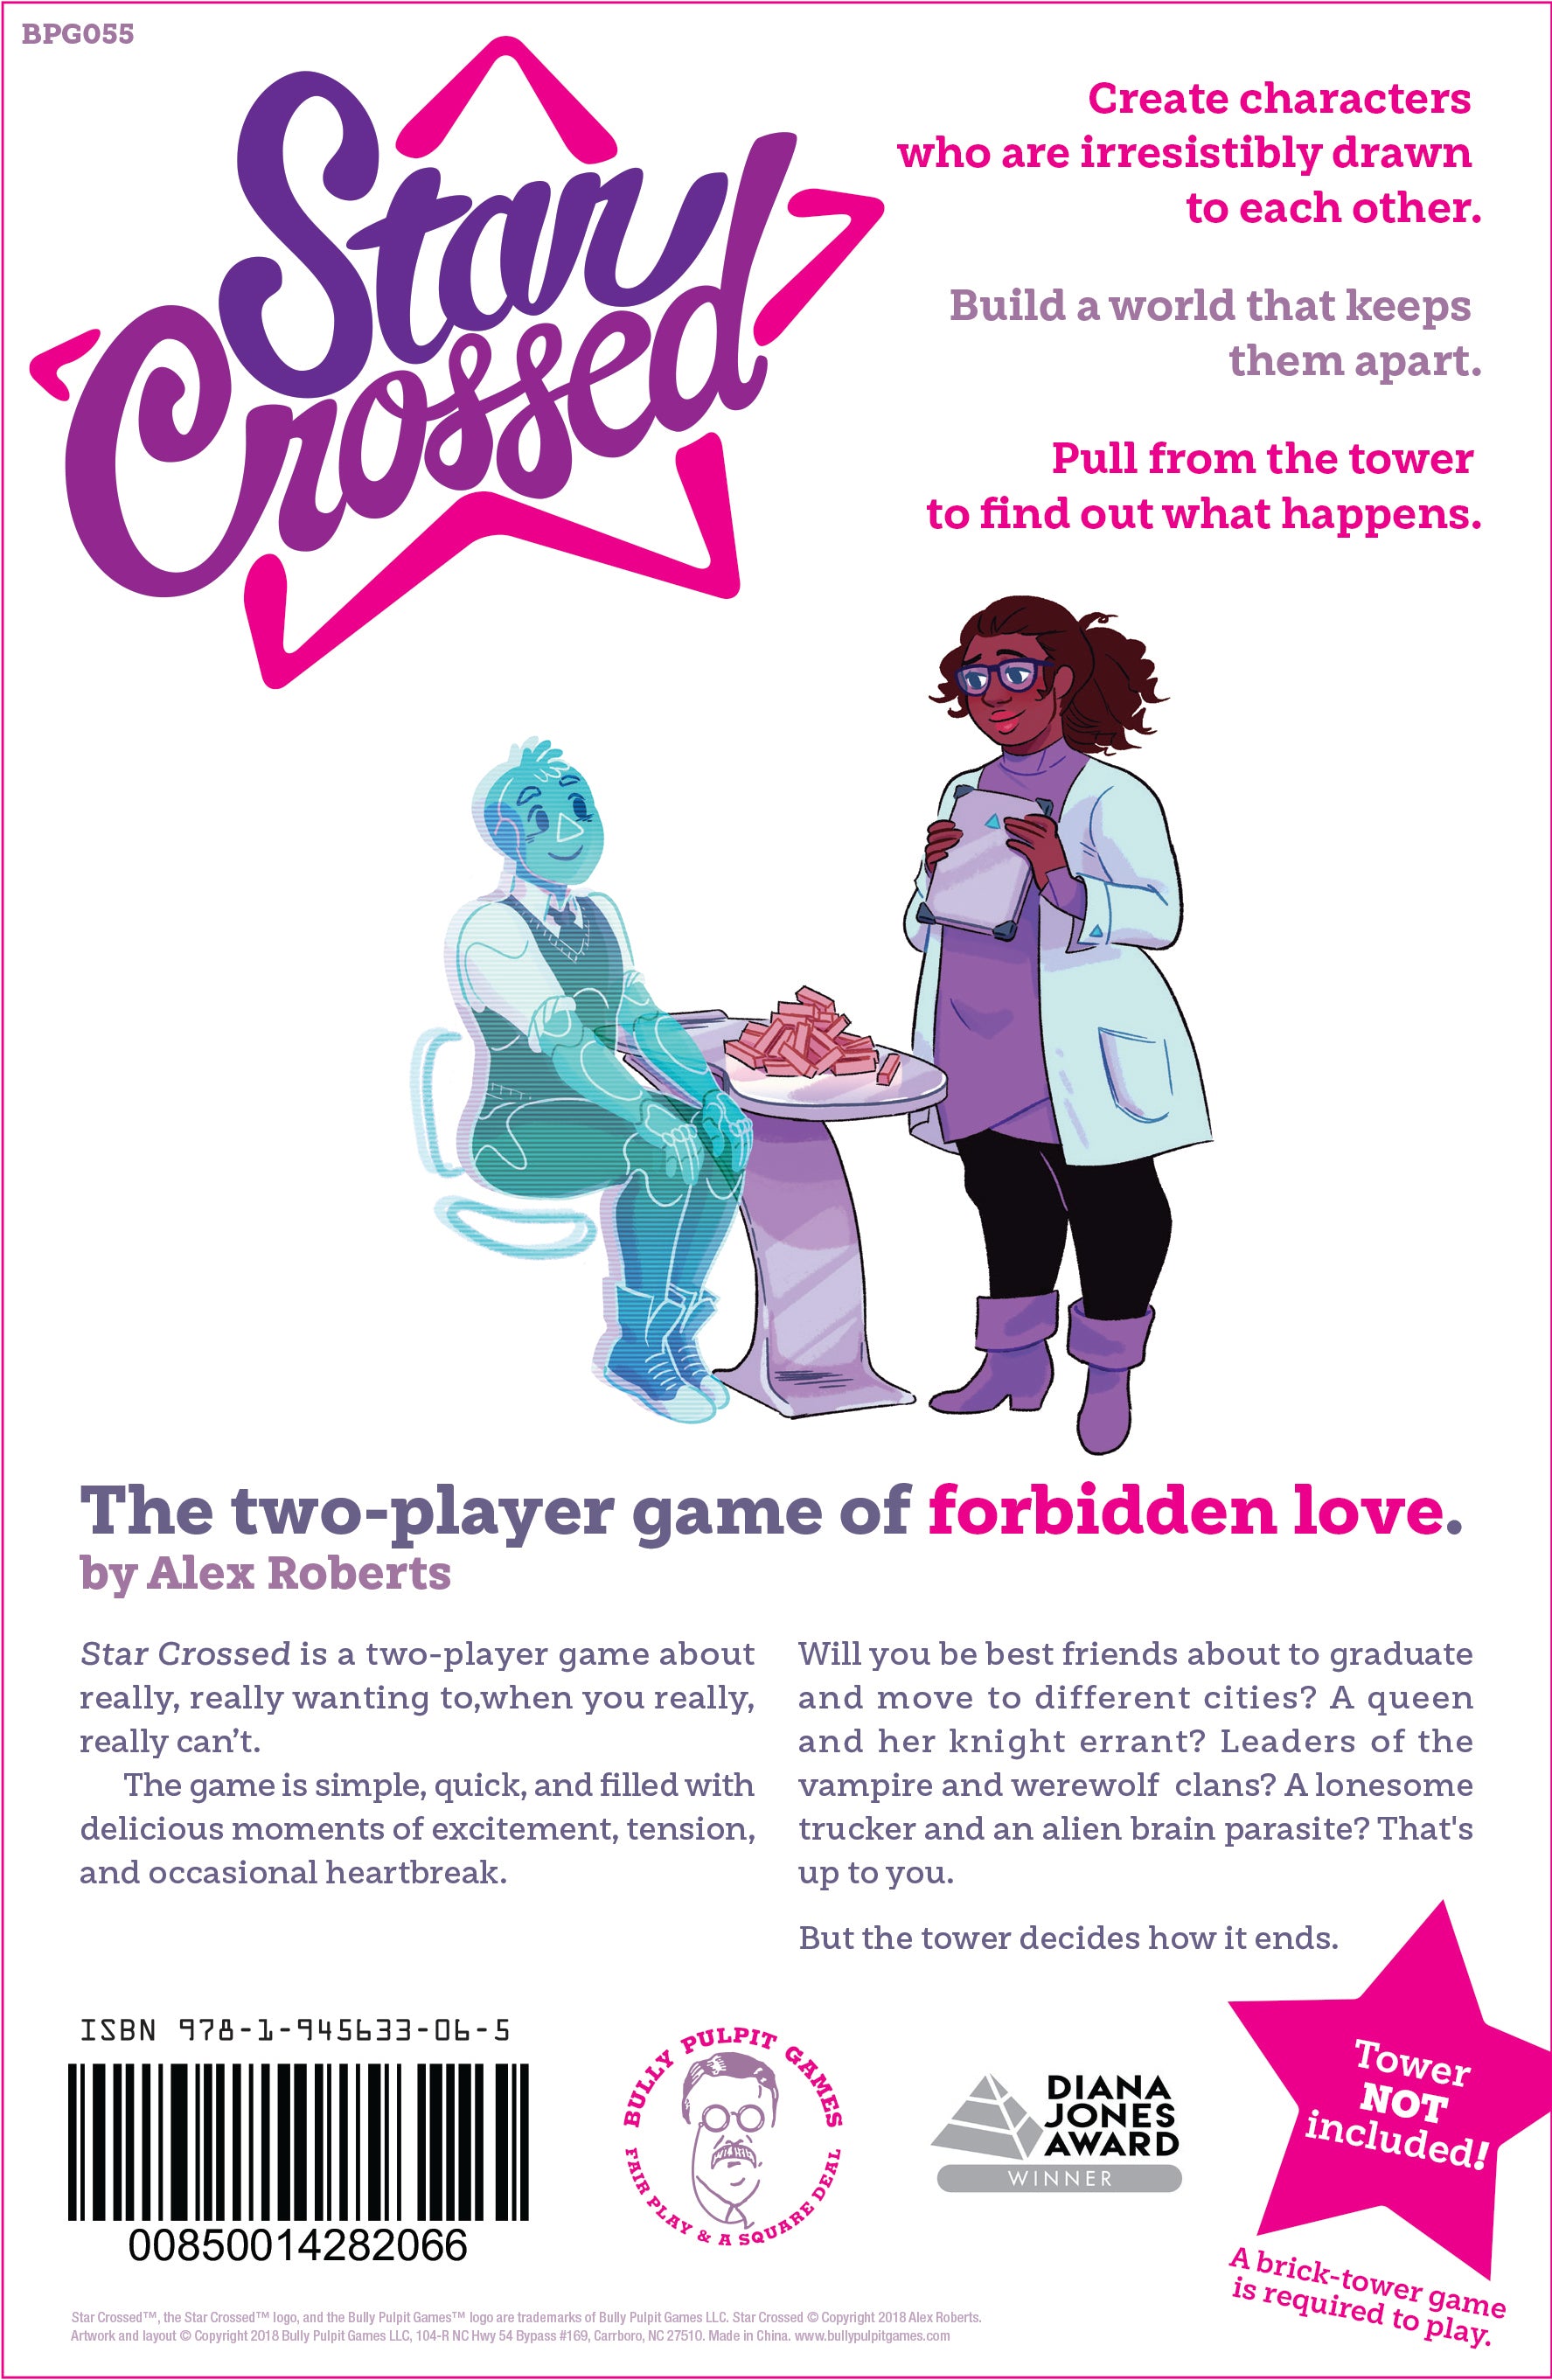 The back of the box for Star Crossed. Text on it reads "Create Characters who are irresistibly drawn to each other. Build a world that keeps them apart. Pull from the tower to find out what happens."